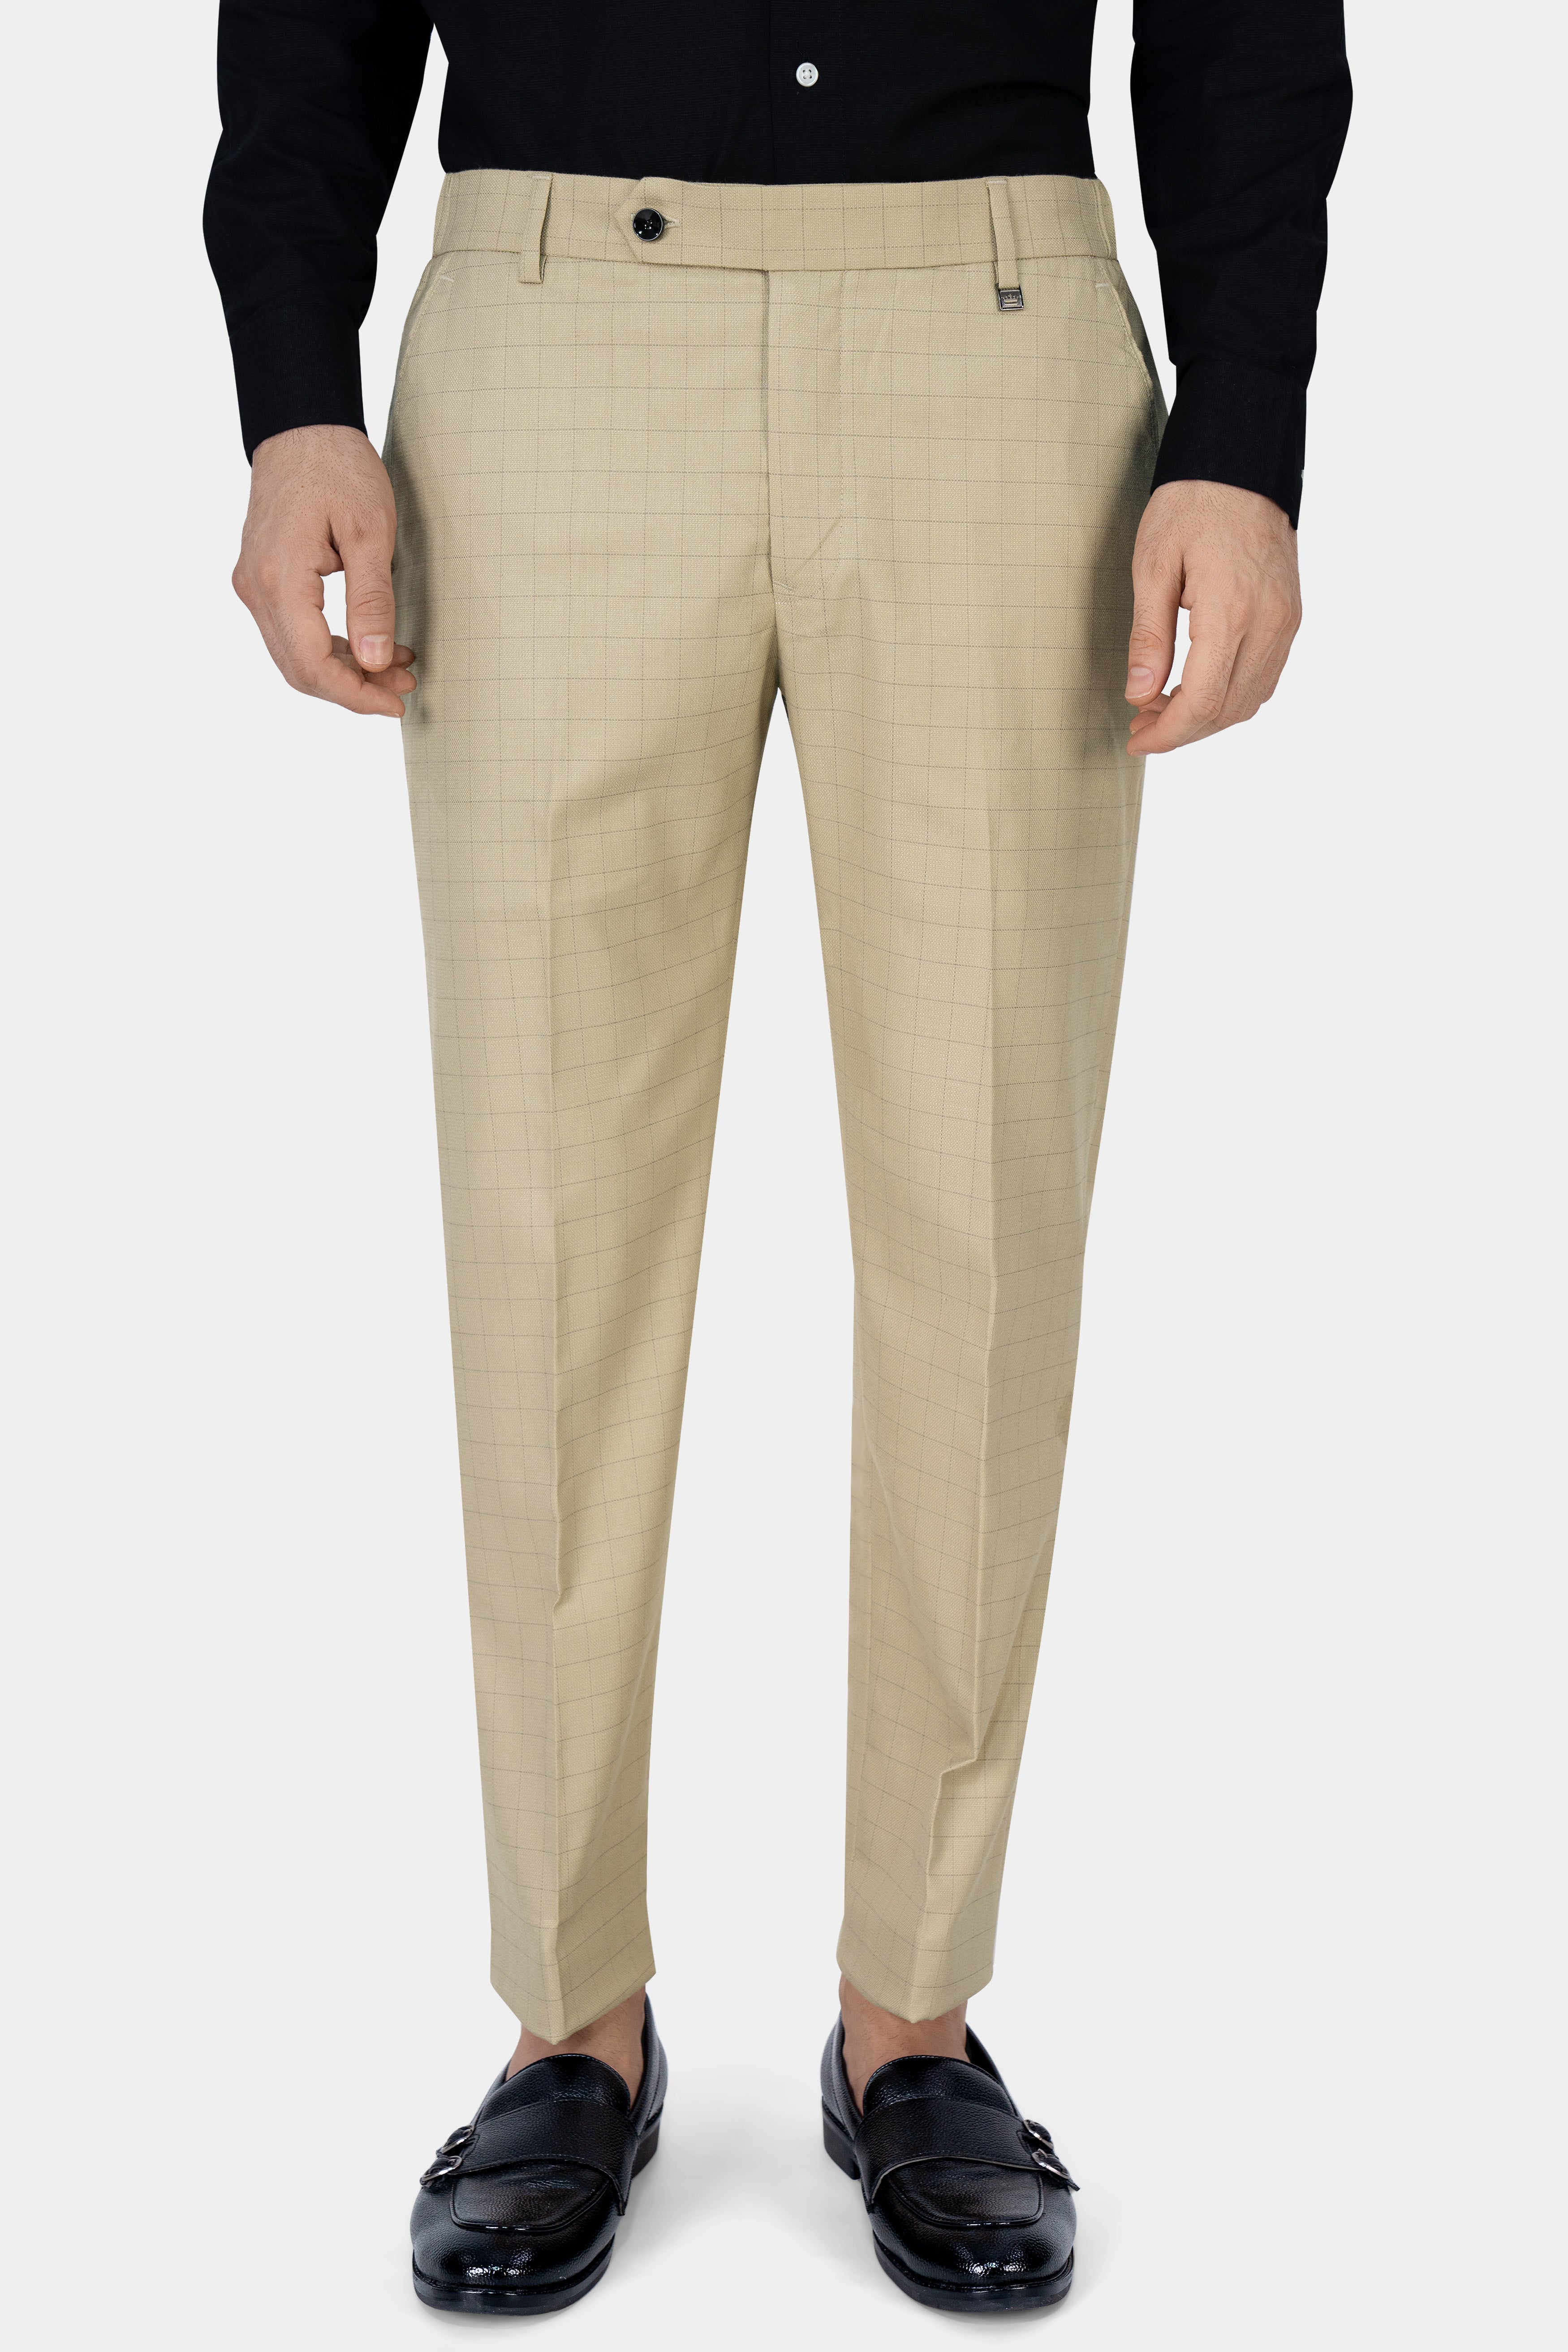 Pavlova Brown with Taupe Brown Checkered Dobby Wool Rich Cross Buttoned Bandhgala Suit ST2878-CBG-36, ST2878-CBG-38, ST2878-CBG-40, ST2878-CBG-42, ST2878-CBG-44, ST2878-CBG-46, ST2878-CBG-48, ST2878-CBG-50, ST2878-CBG-52, ST2878-CBG-54, ST2878-CBG-56, ST2878-CBG-58, ST2878-CBG-60